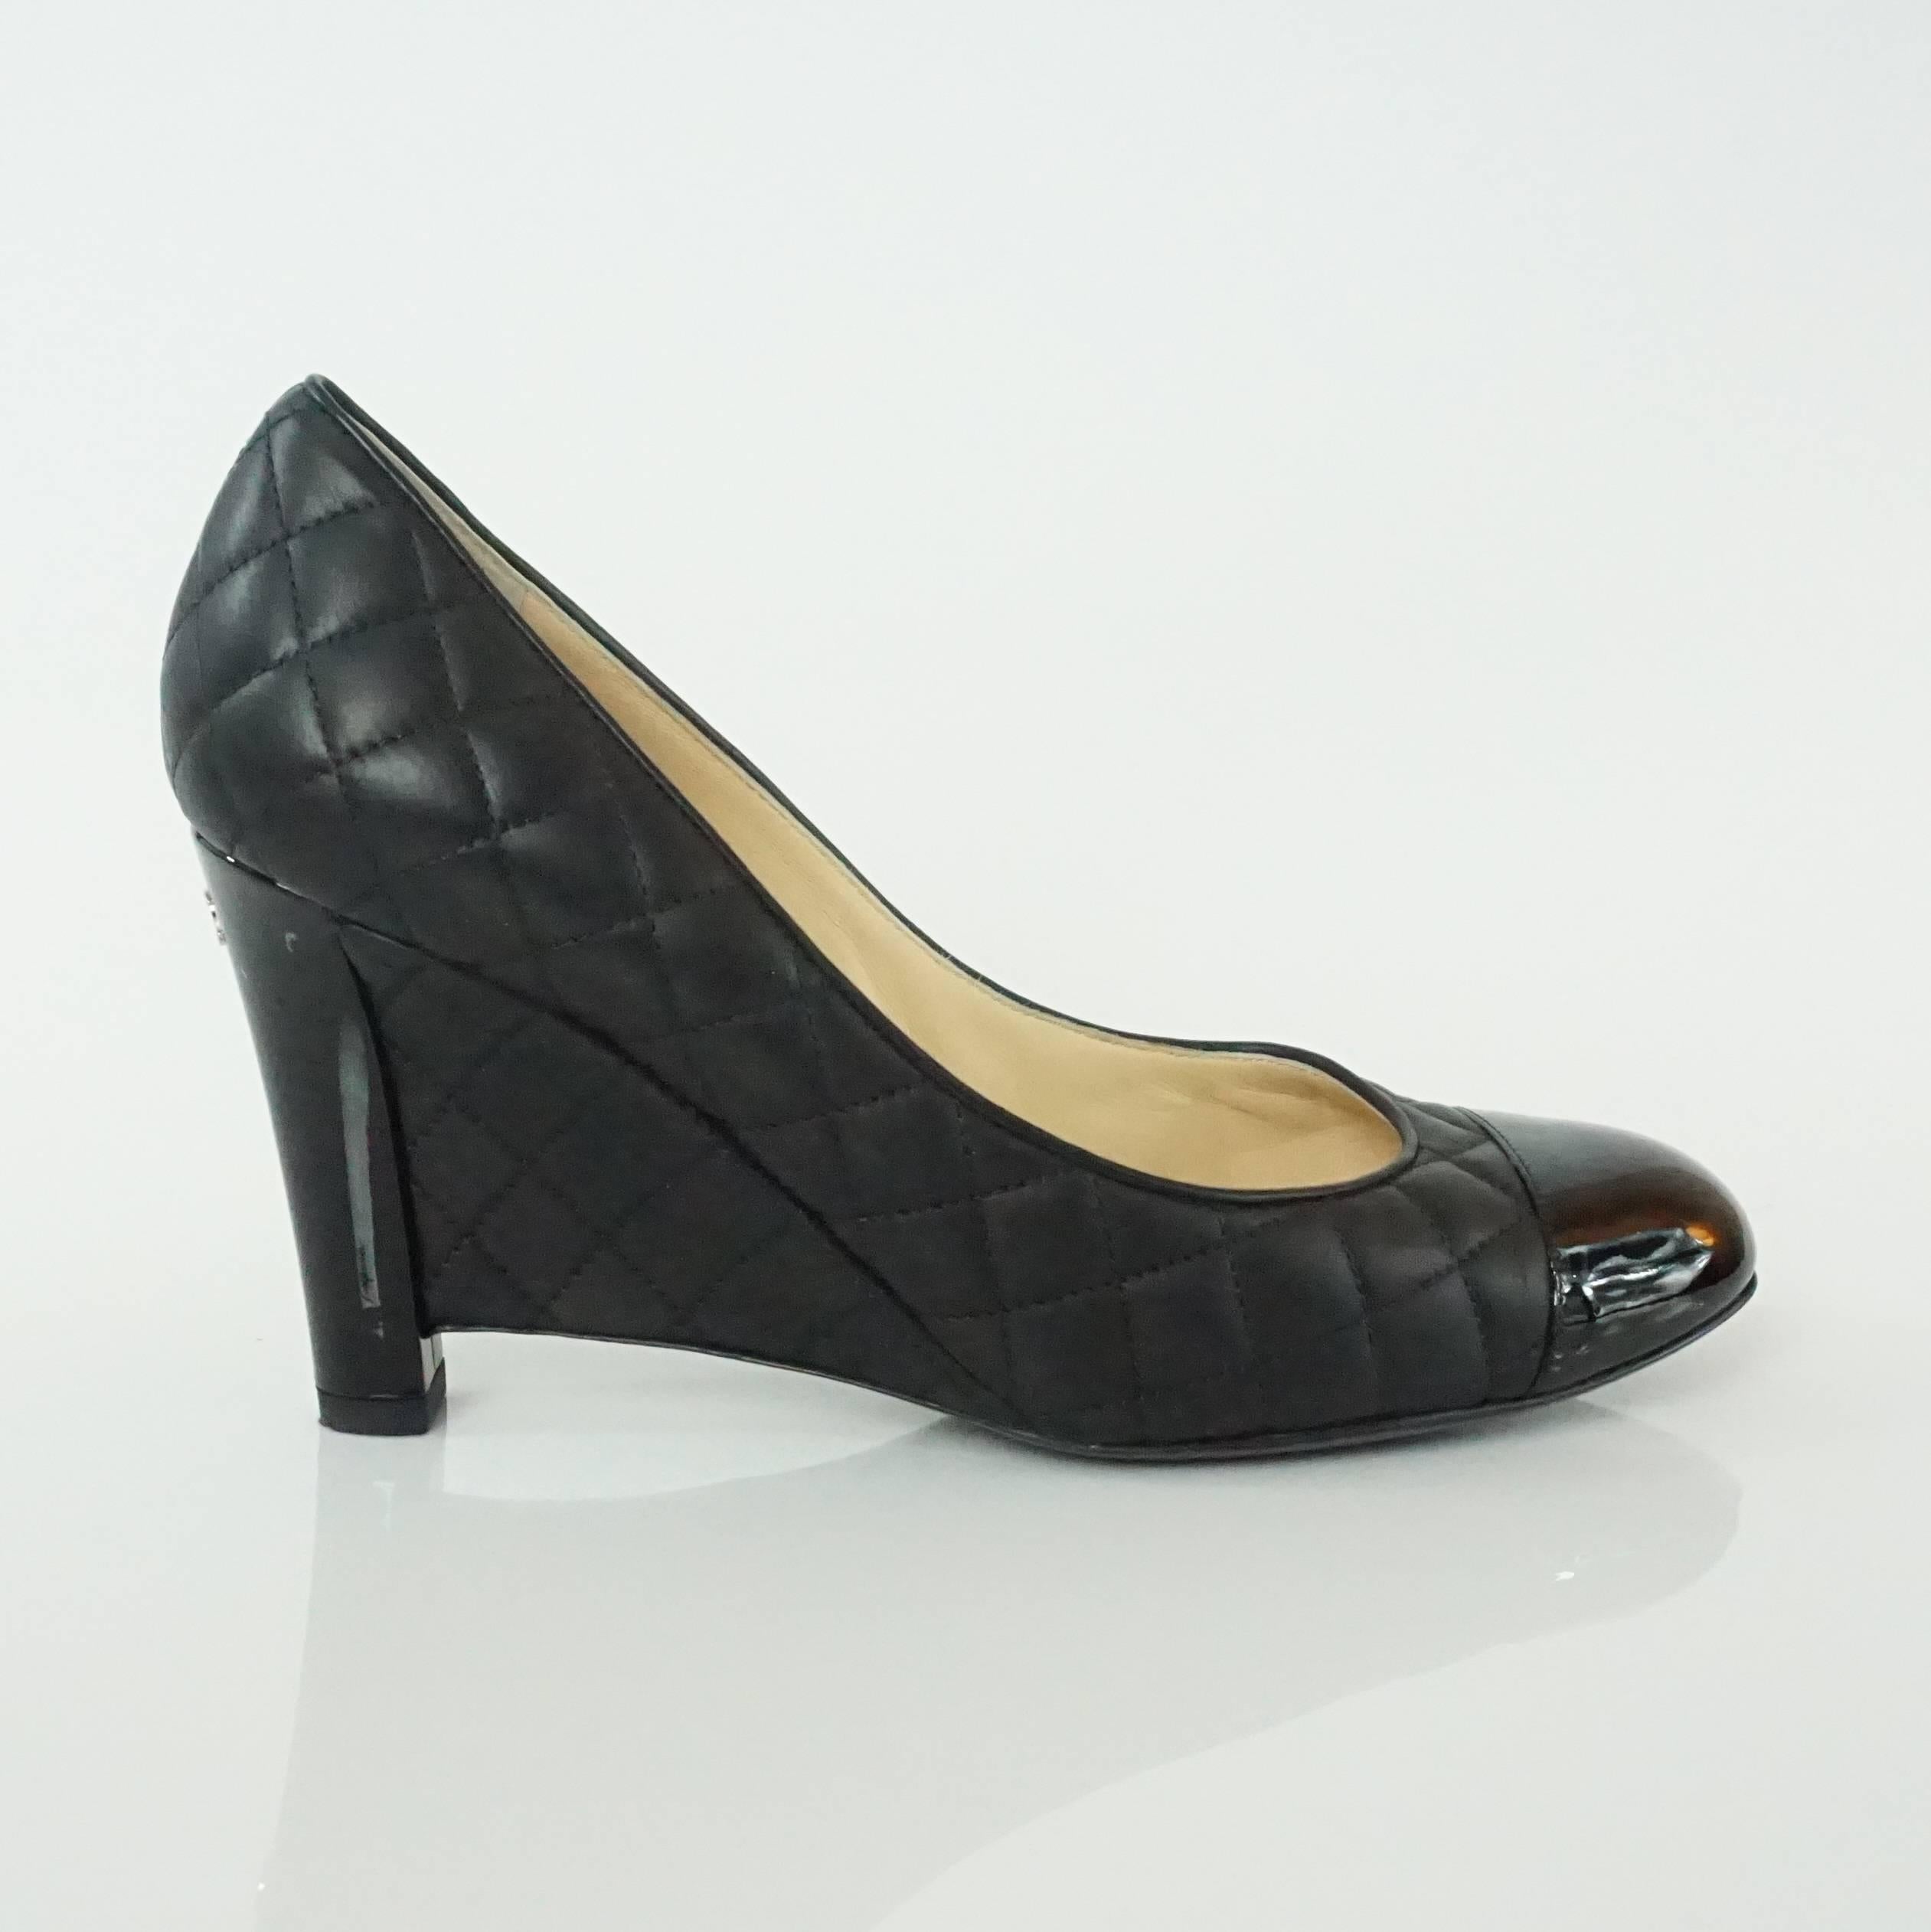 These Chanel black leather wedges are entirely quilted with a patent toe and heel with a 